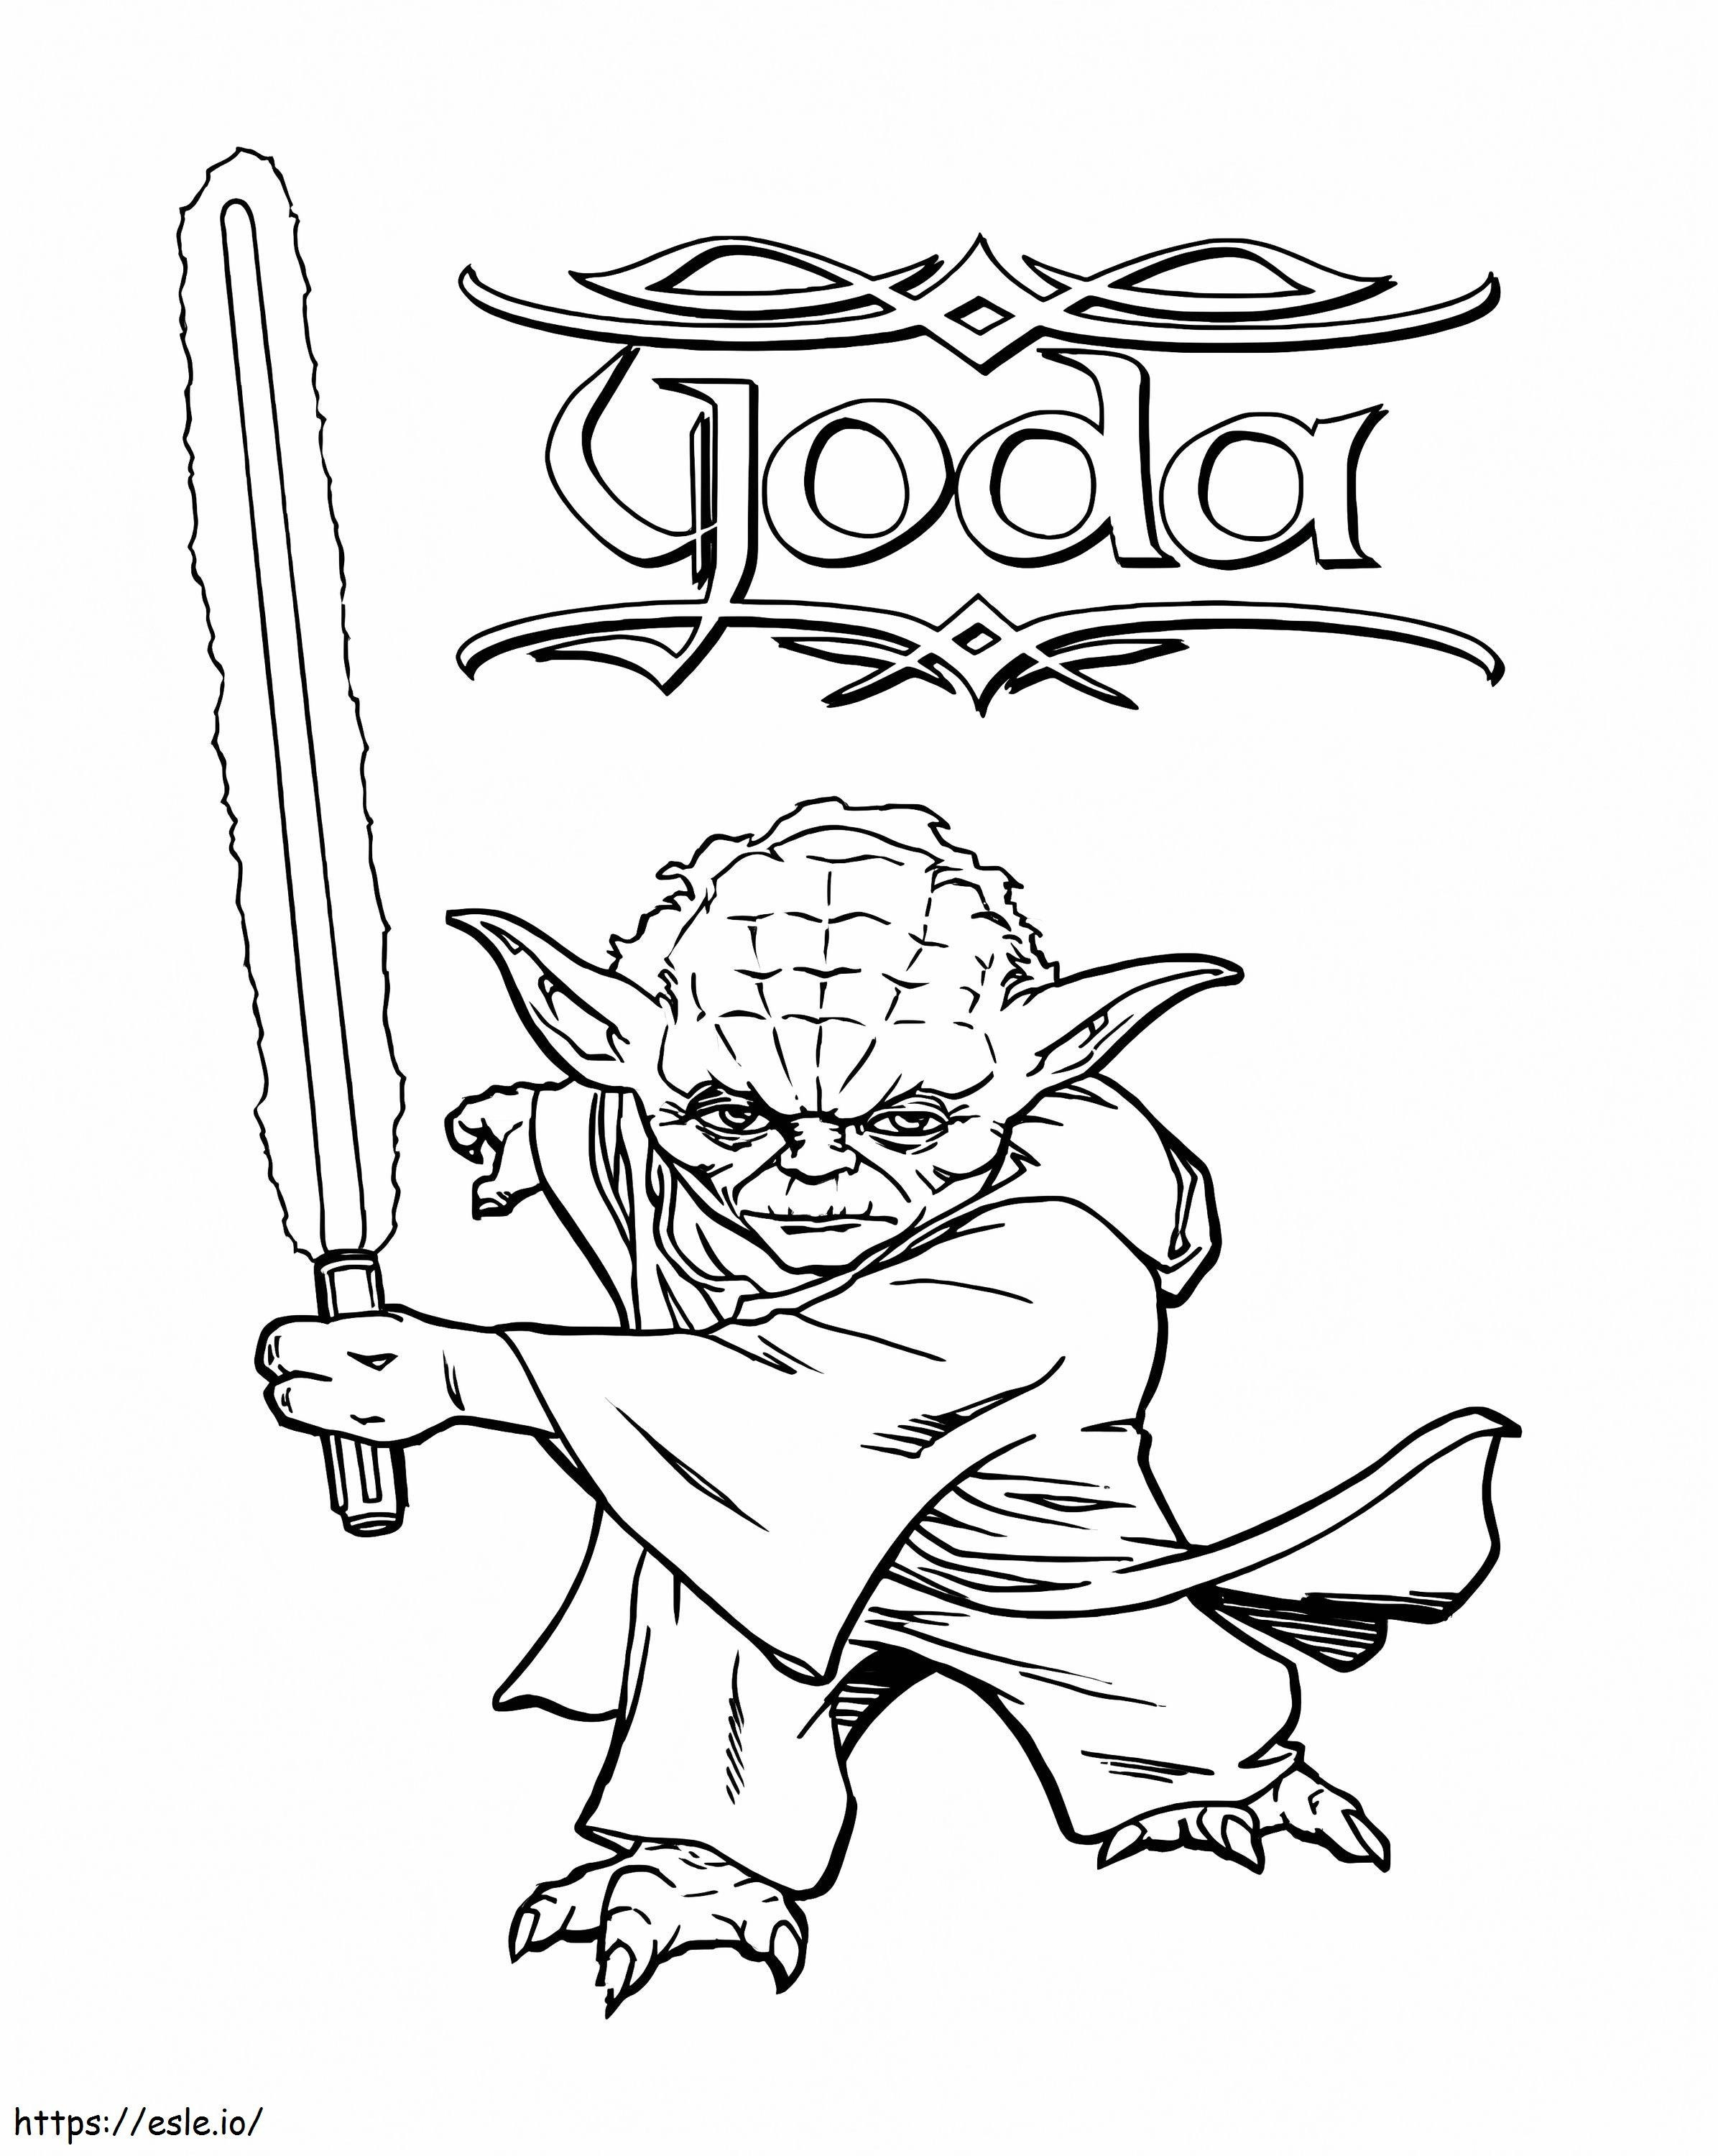 Master Yoda With Lightsaber coloring page